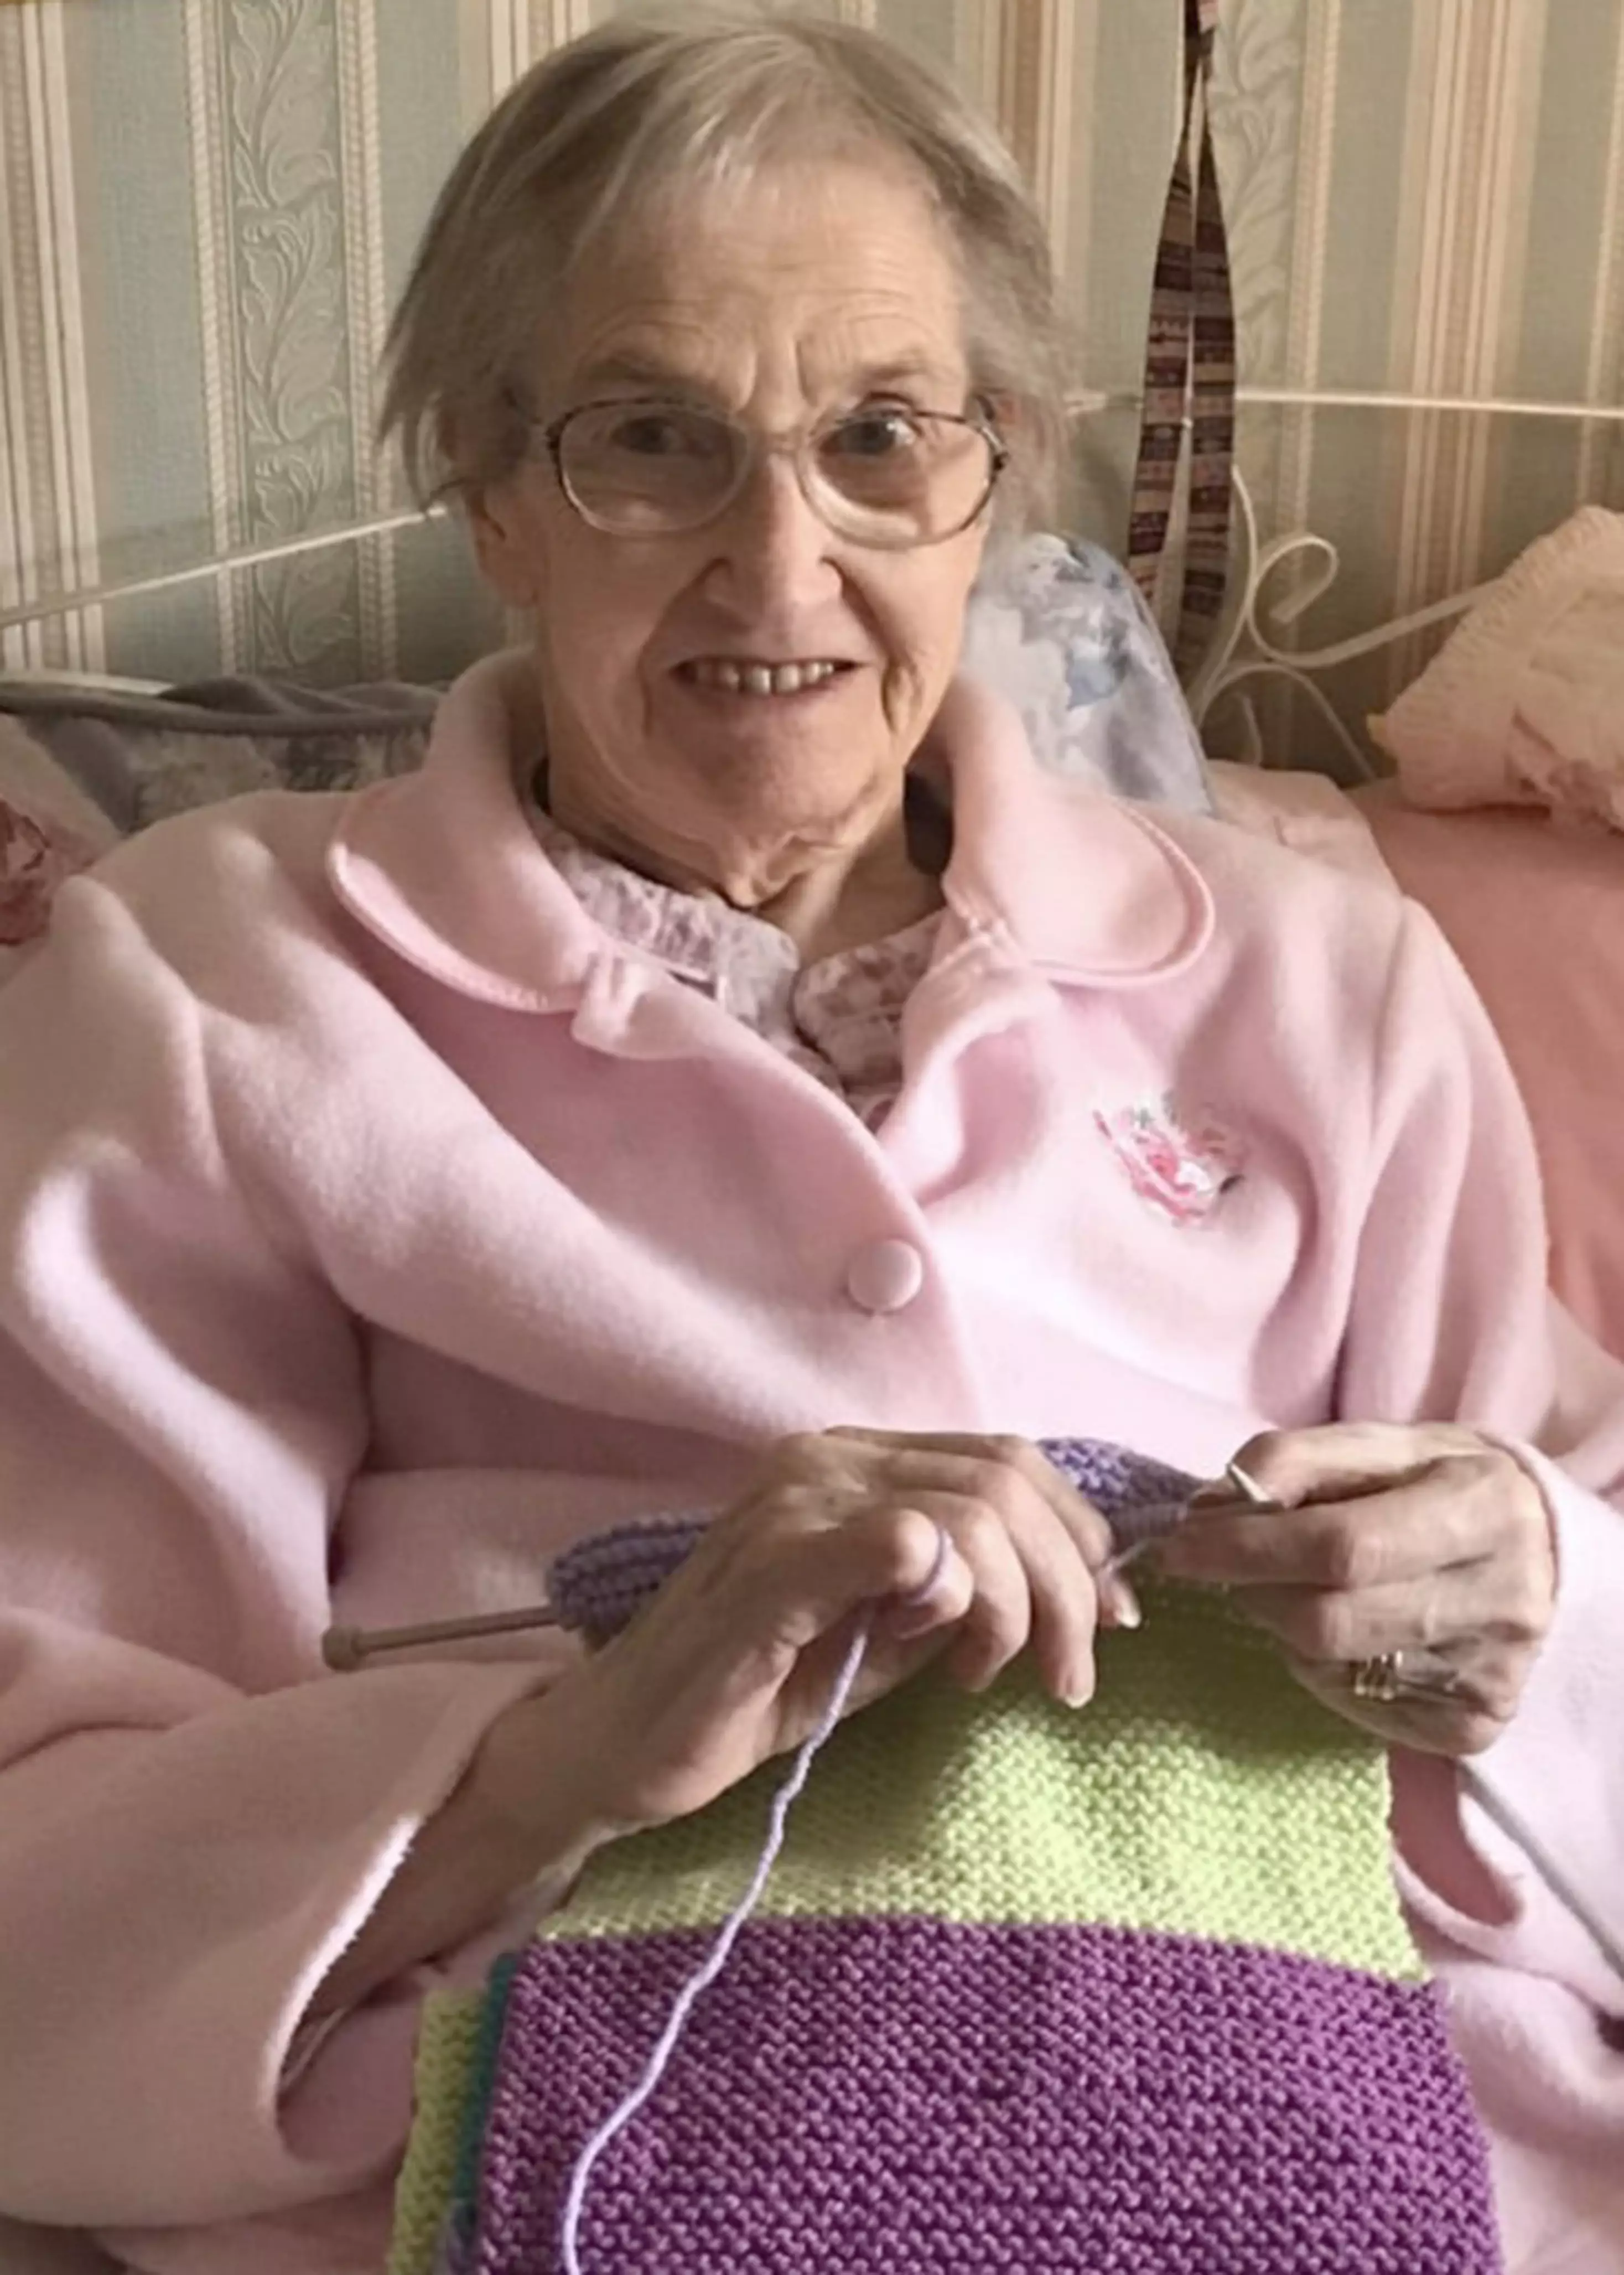 Enid knitted the blanket while recovering from pneumonia (